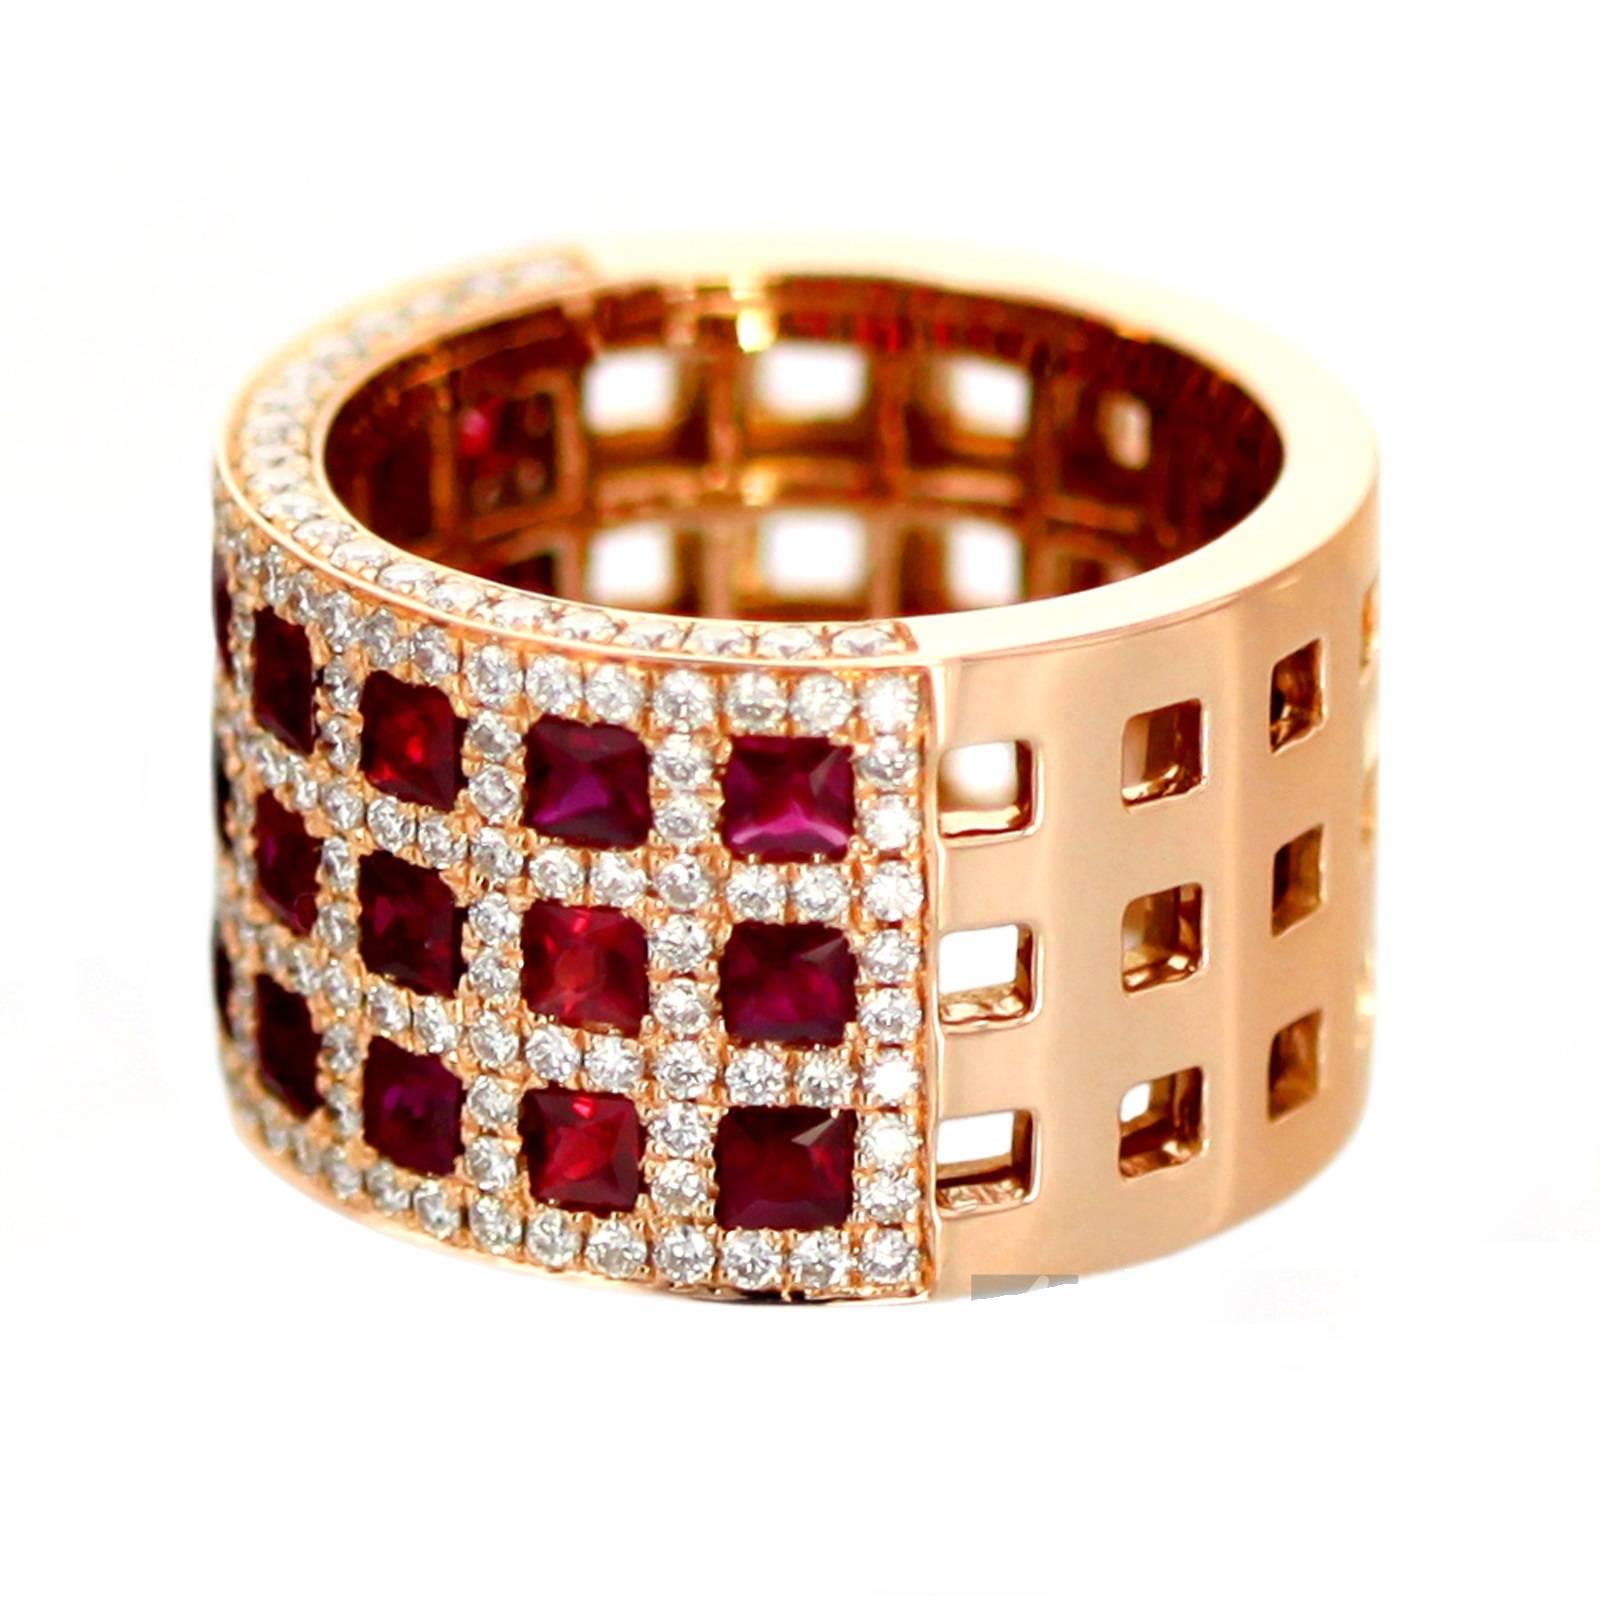 Piece is made as first generation jewelry piece
Exclusive premium grade calibrated diamonds
Set with 1.40 carats of diamonds and 2.41 carats of rubies
Features 19K signature seamless micro pave setting
Advanced jewelry manufacturing